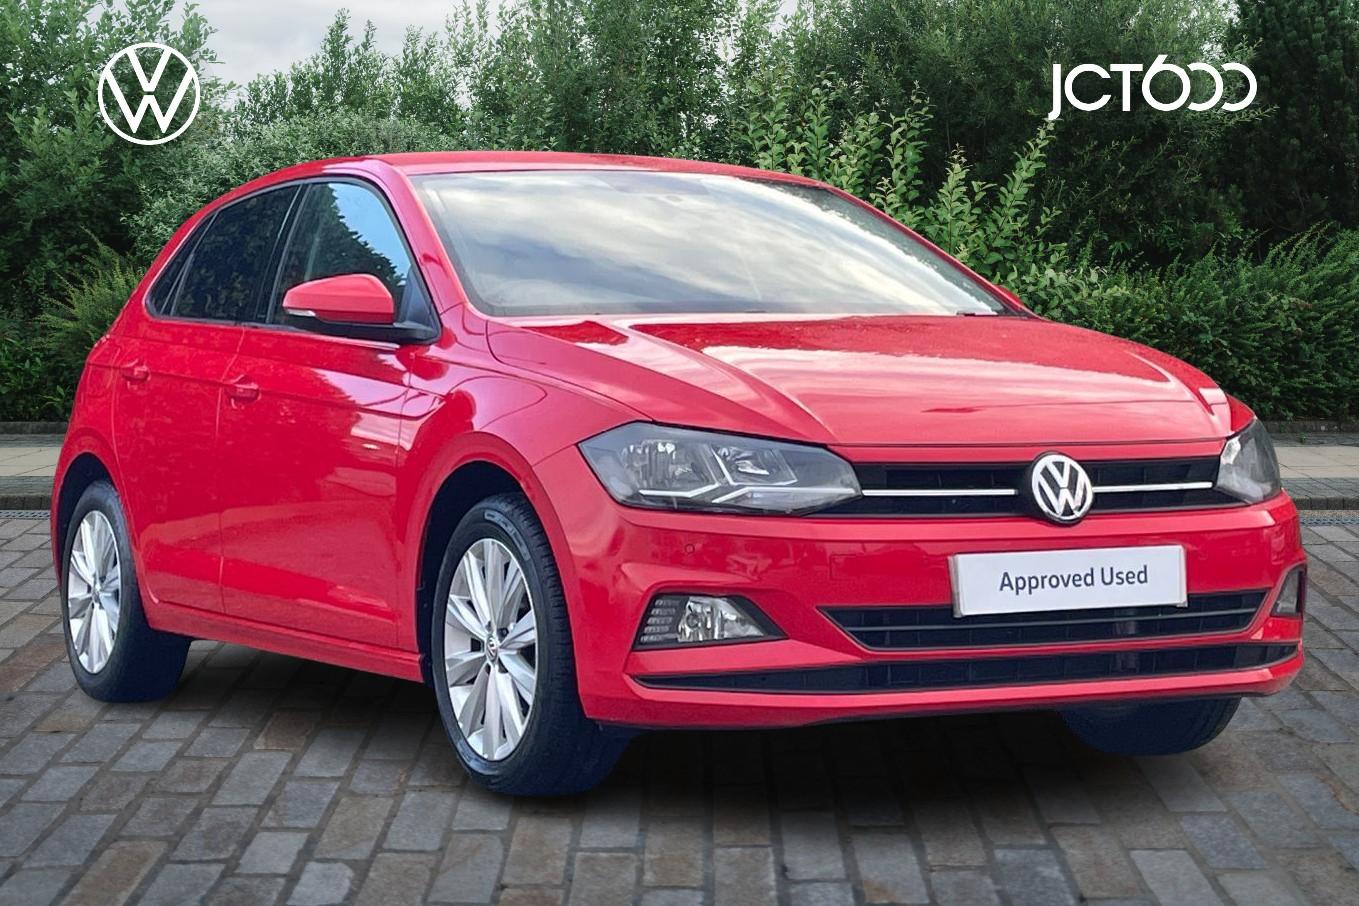 2020 Volkswagen Polo 1.0 TSI 95 Match 5dr £14,076 14,495 miles Red | JCT600